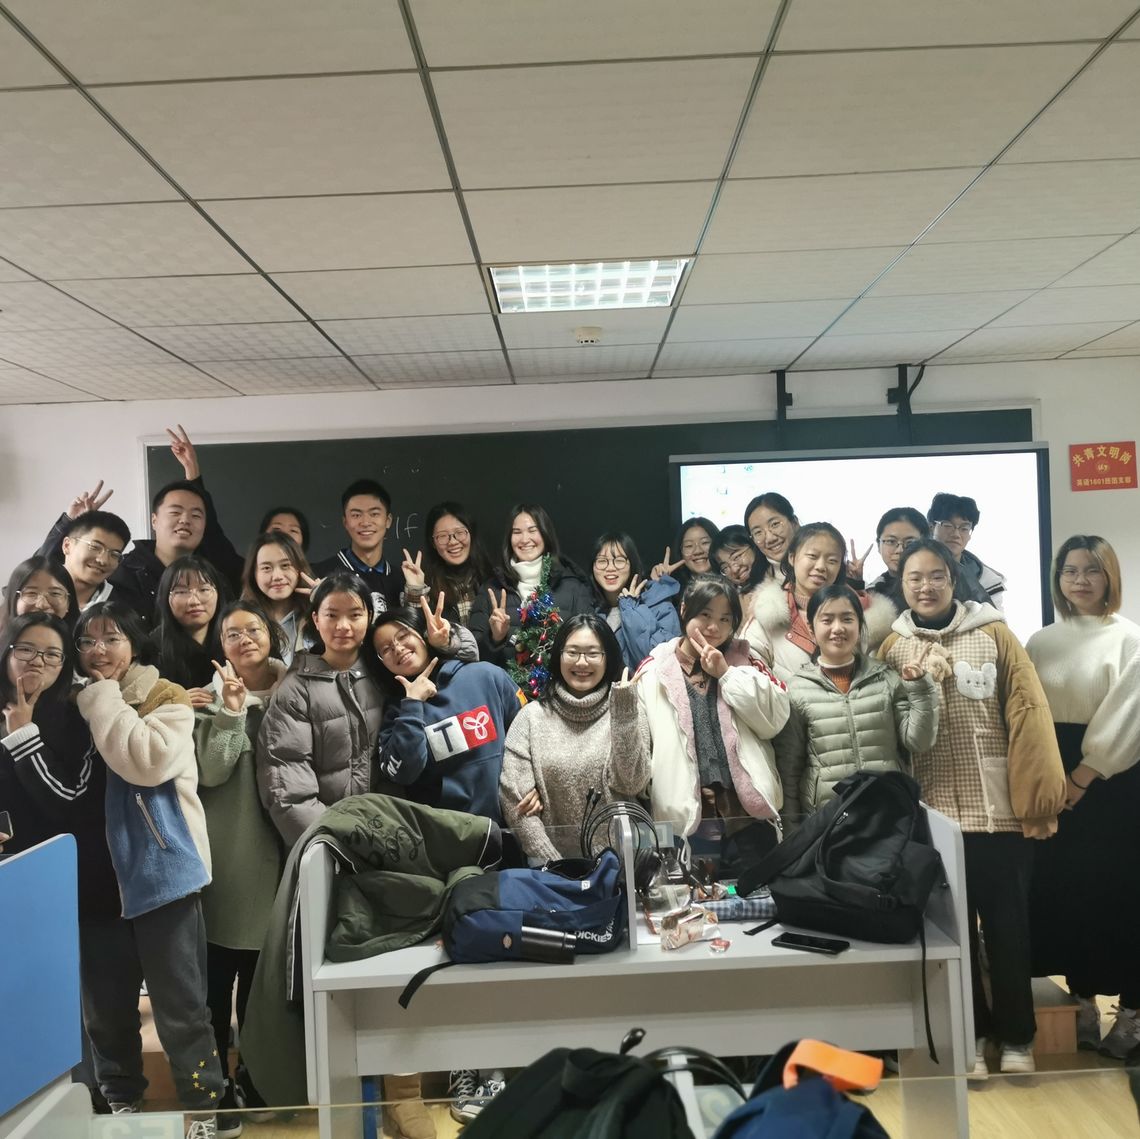 Chappell with Wuhan University of Technology students on their last day of fall class.